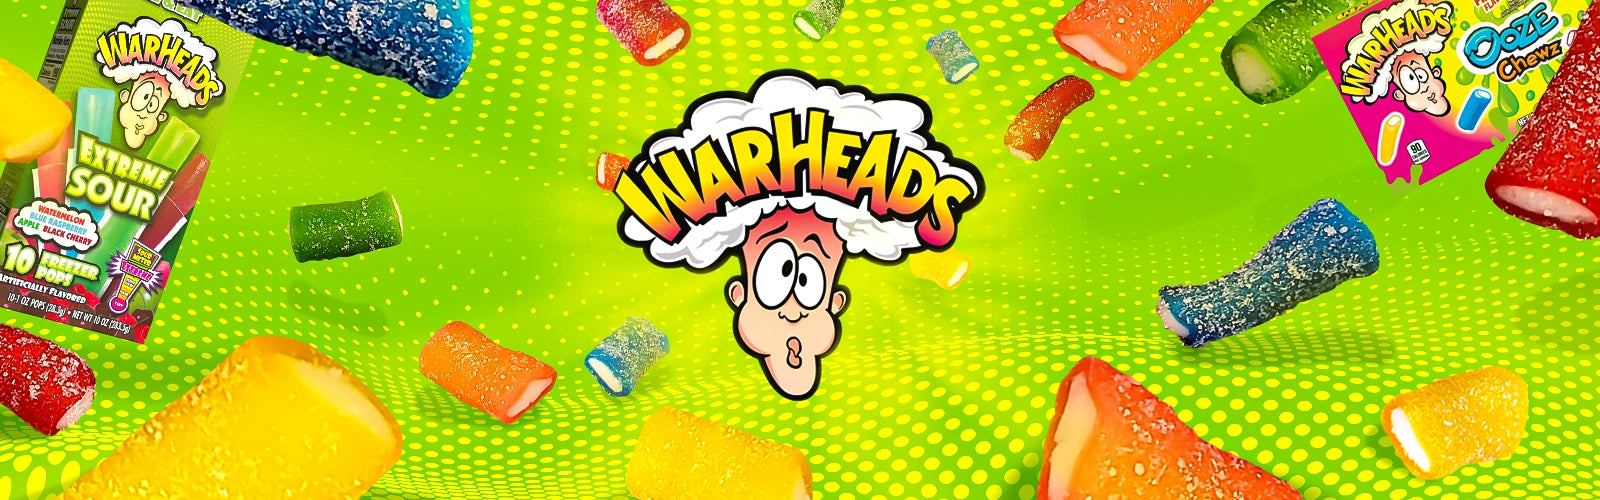 Warheads in collection Banner